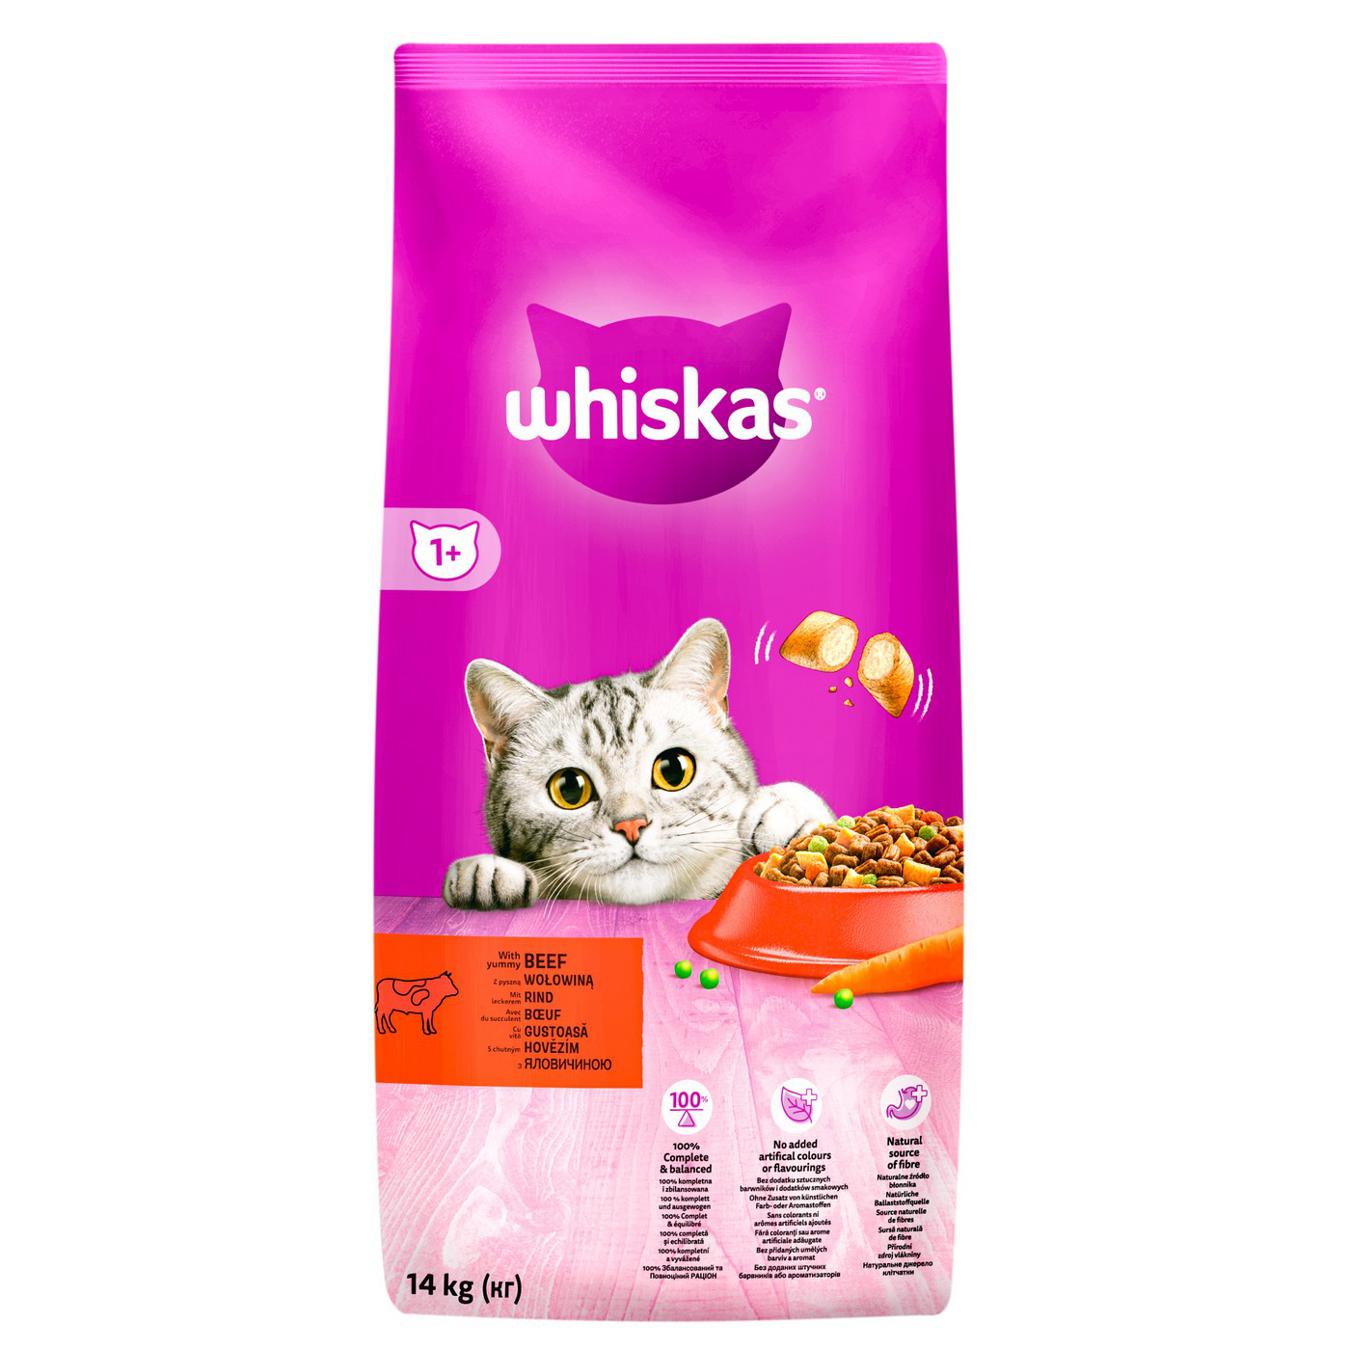 Whiskas cat food in an assortment of weights